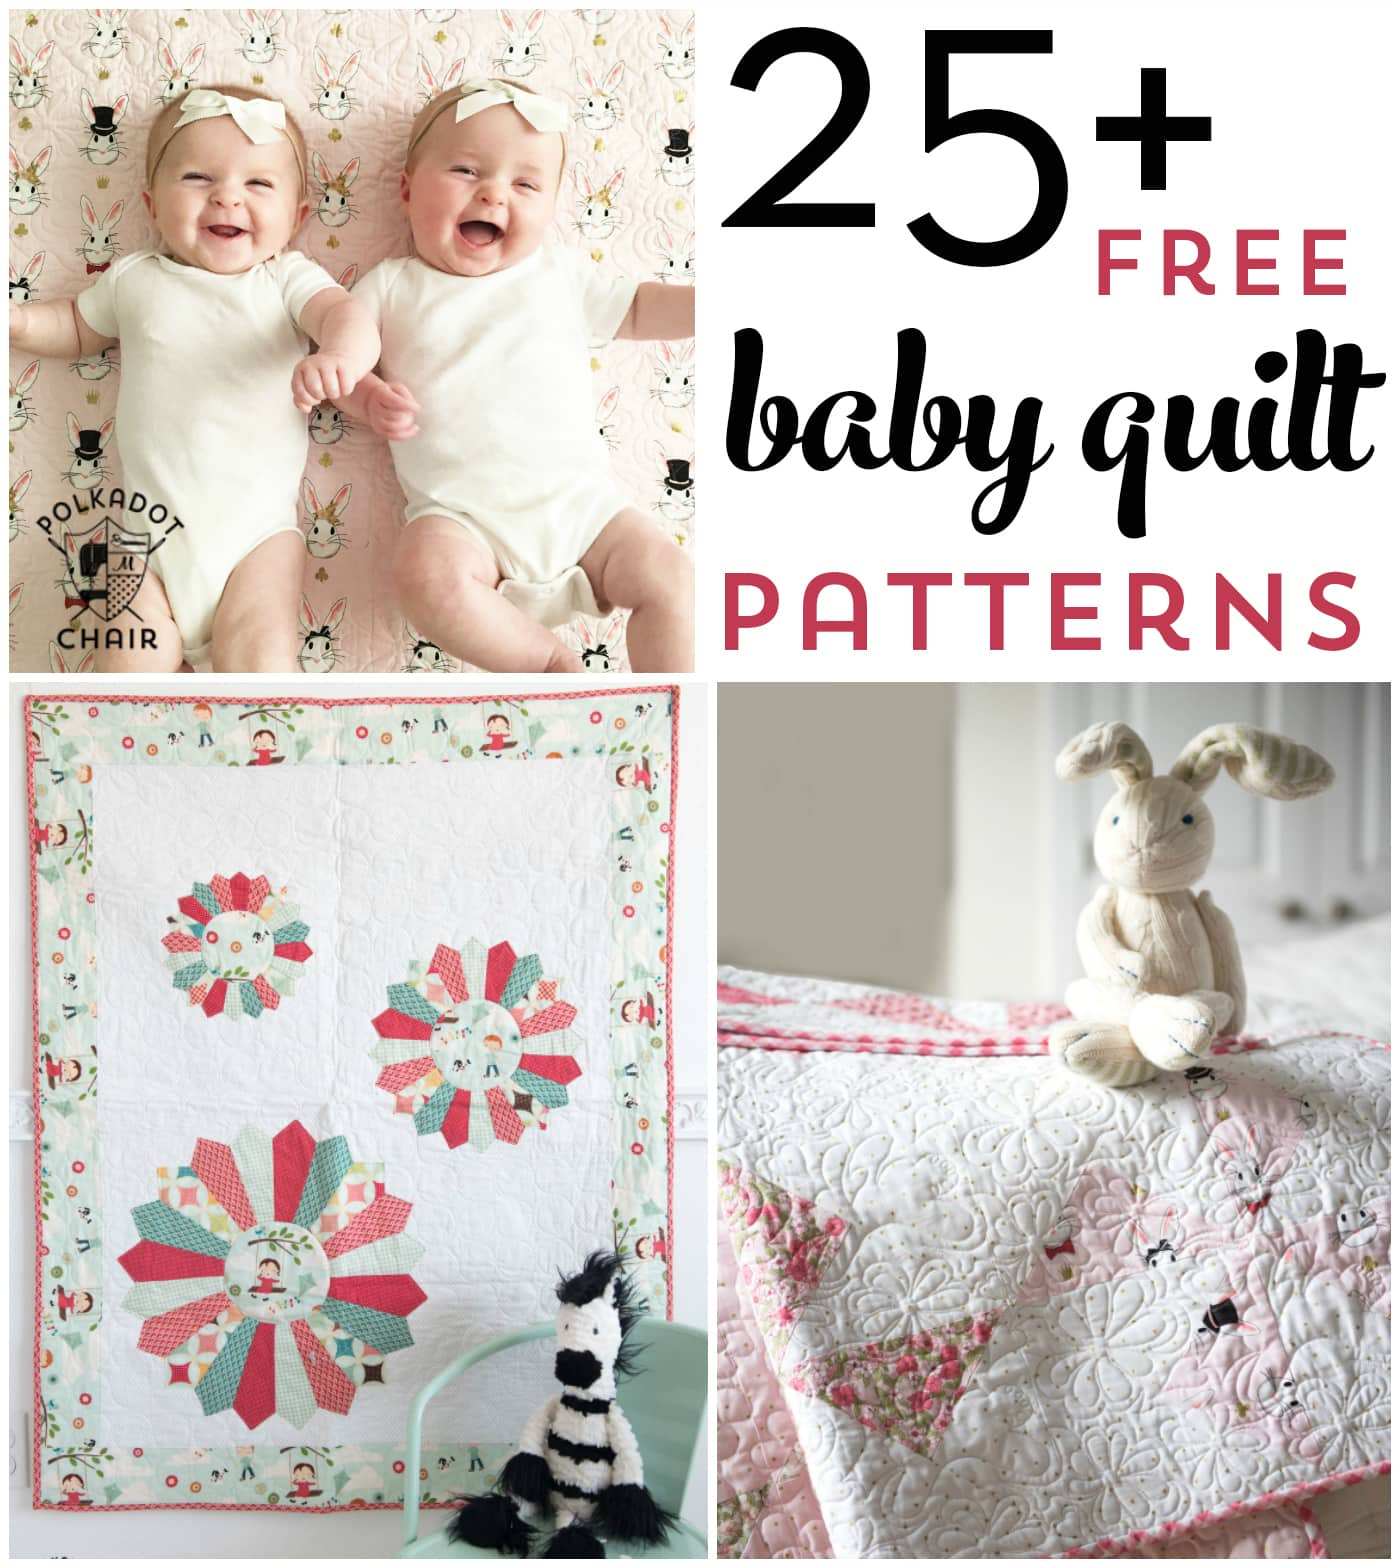 Hand Embroidery Patterns For Baby Quilts 25 Ba Quilt Patterns The Polka Dot Chair